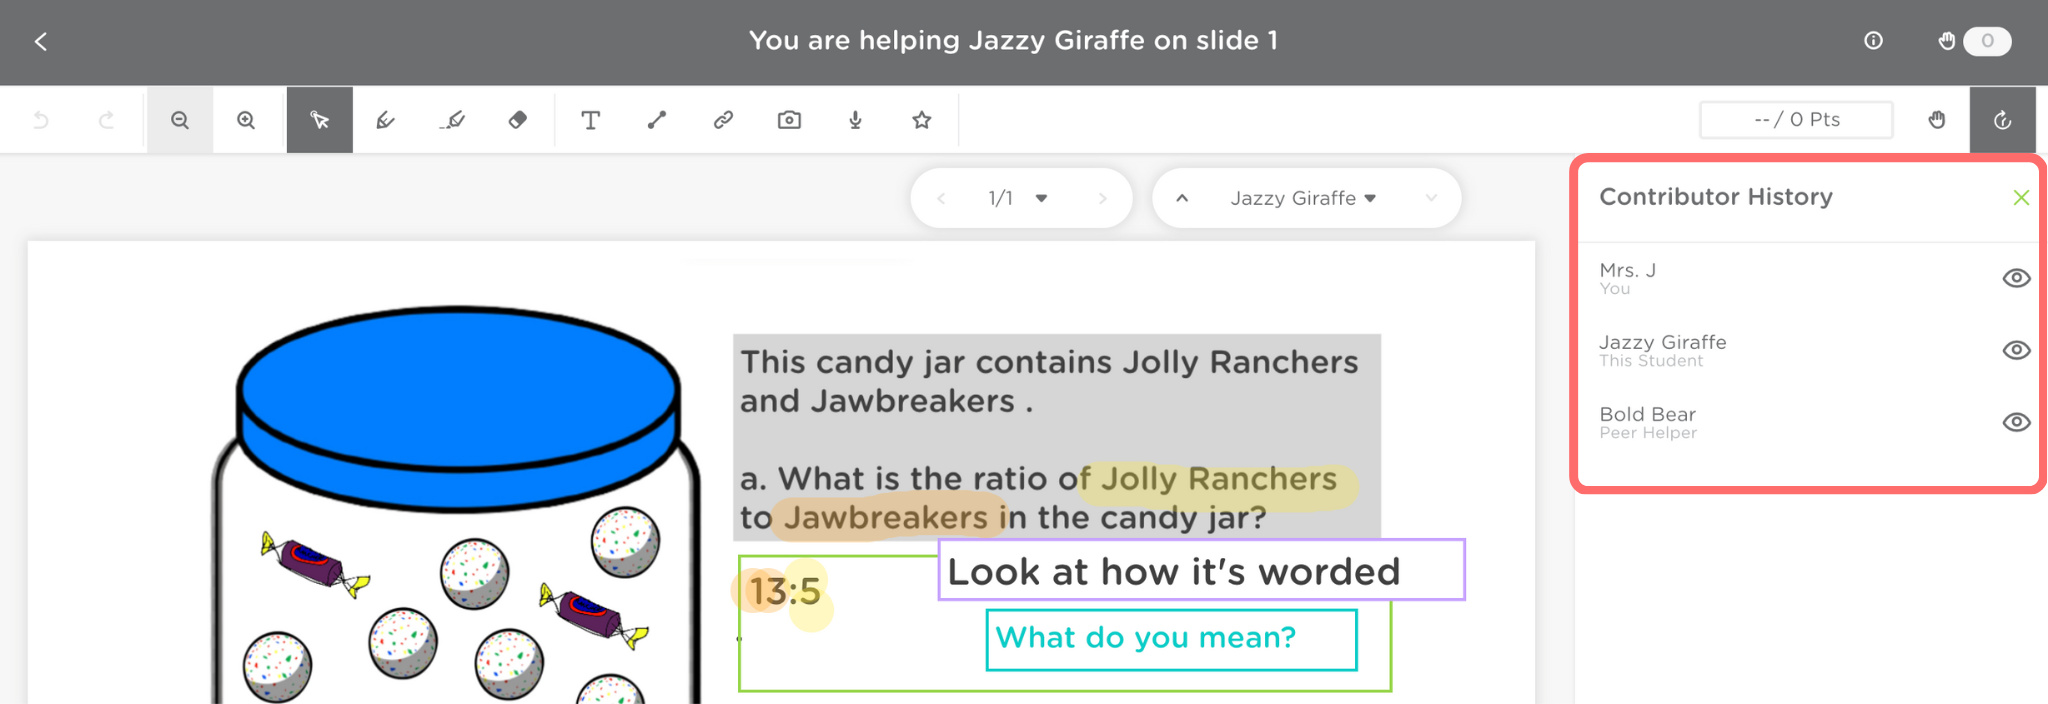 The Toggle Contributors button is selected and we see the Contributor History listed. Mrs. J, you (the teacher), Jazzy Giraffe, this student, and Bold Bear, a peer helper.